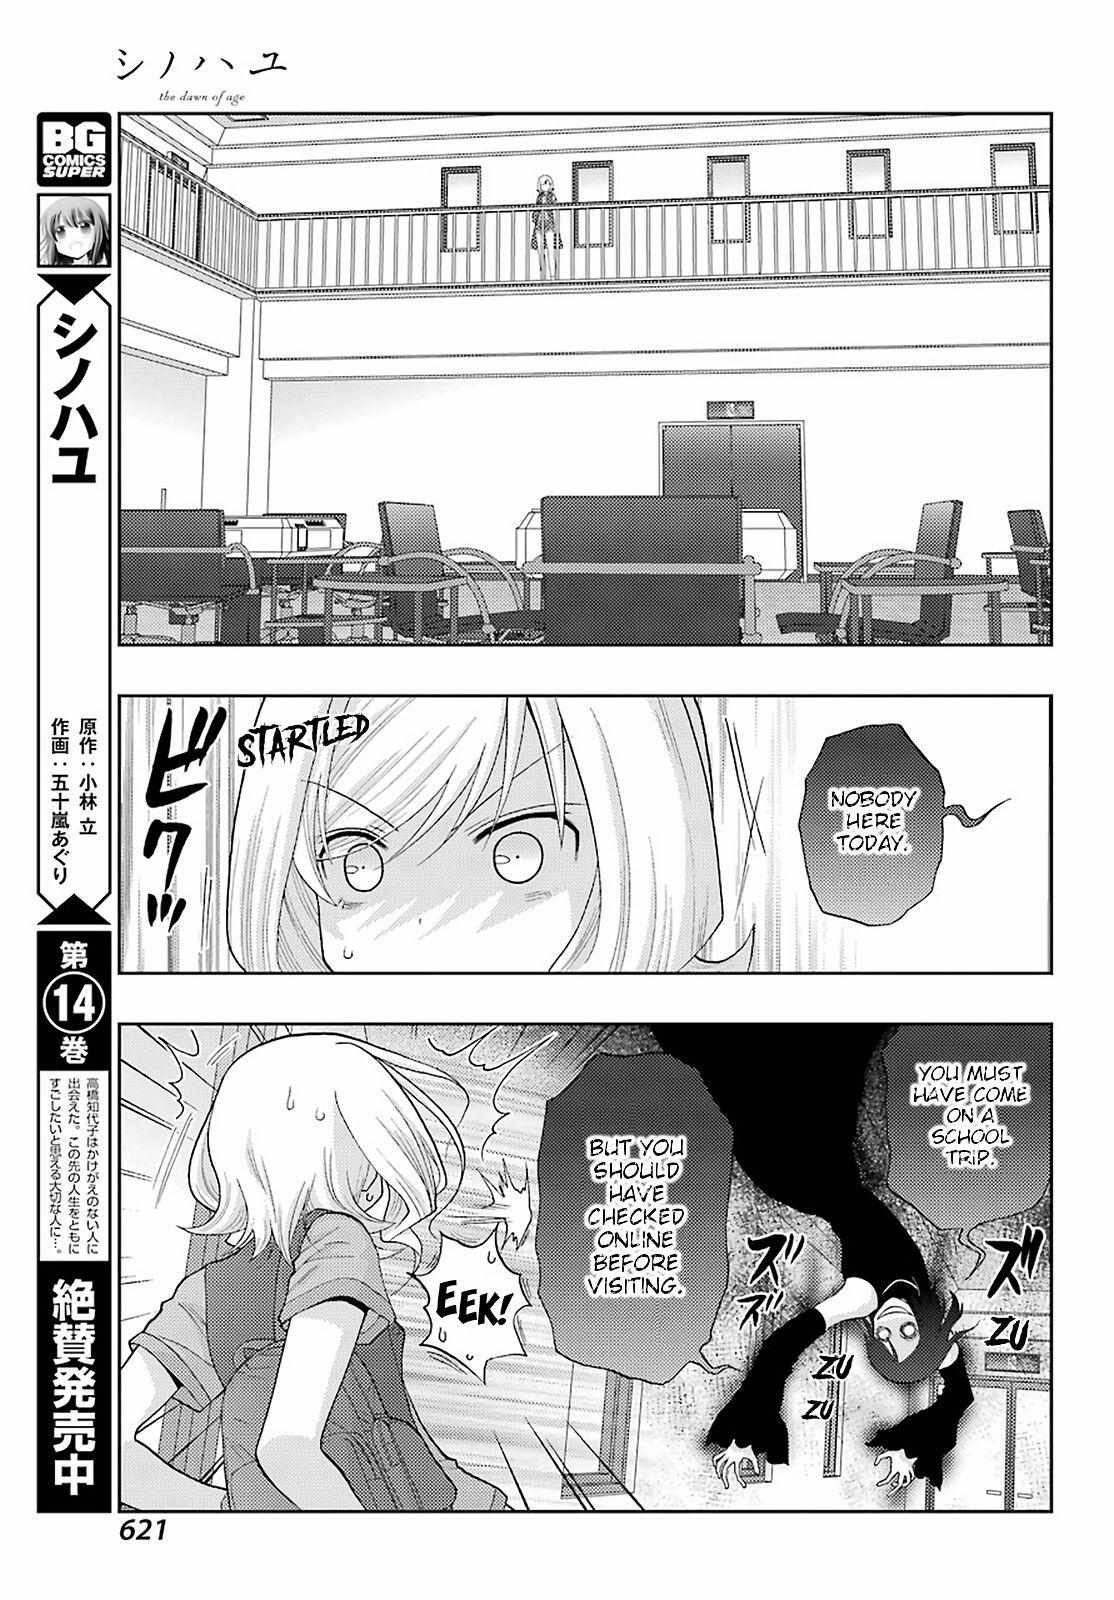 Side Story of - Saki - Shinohayu the Dawn of Age - chapter 92 - #4